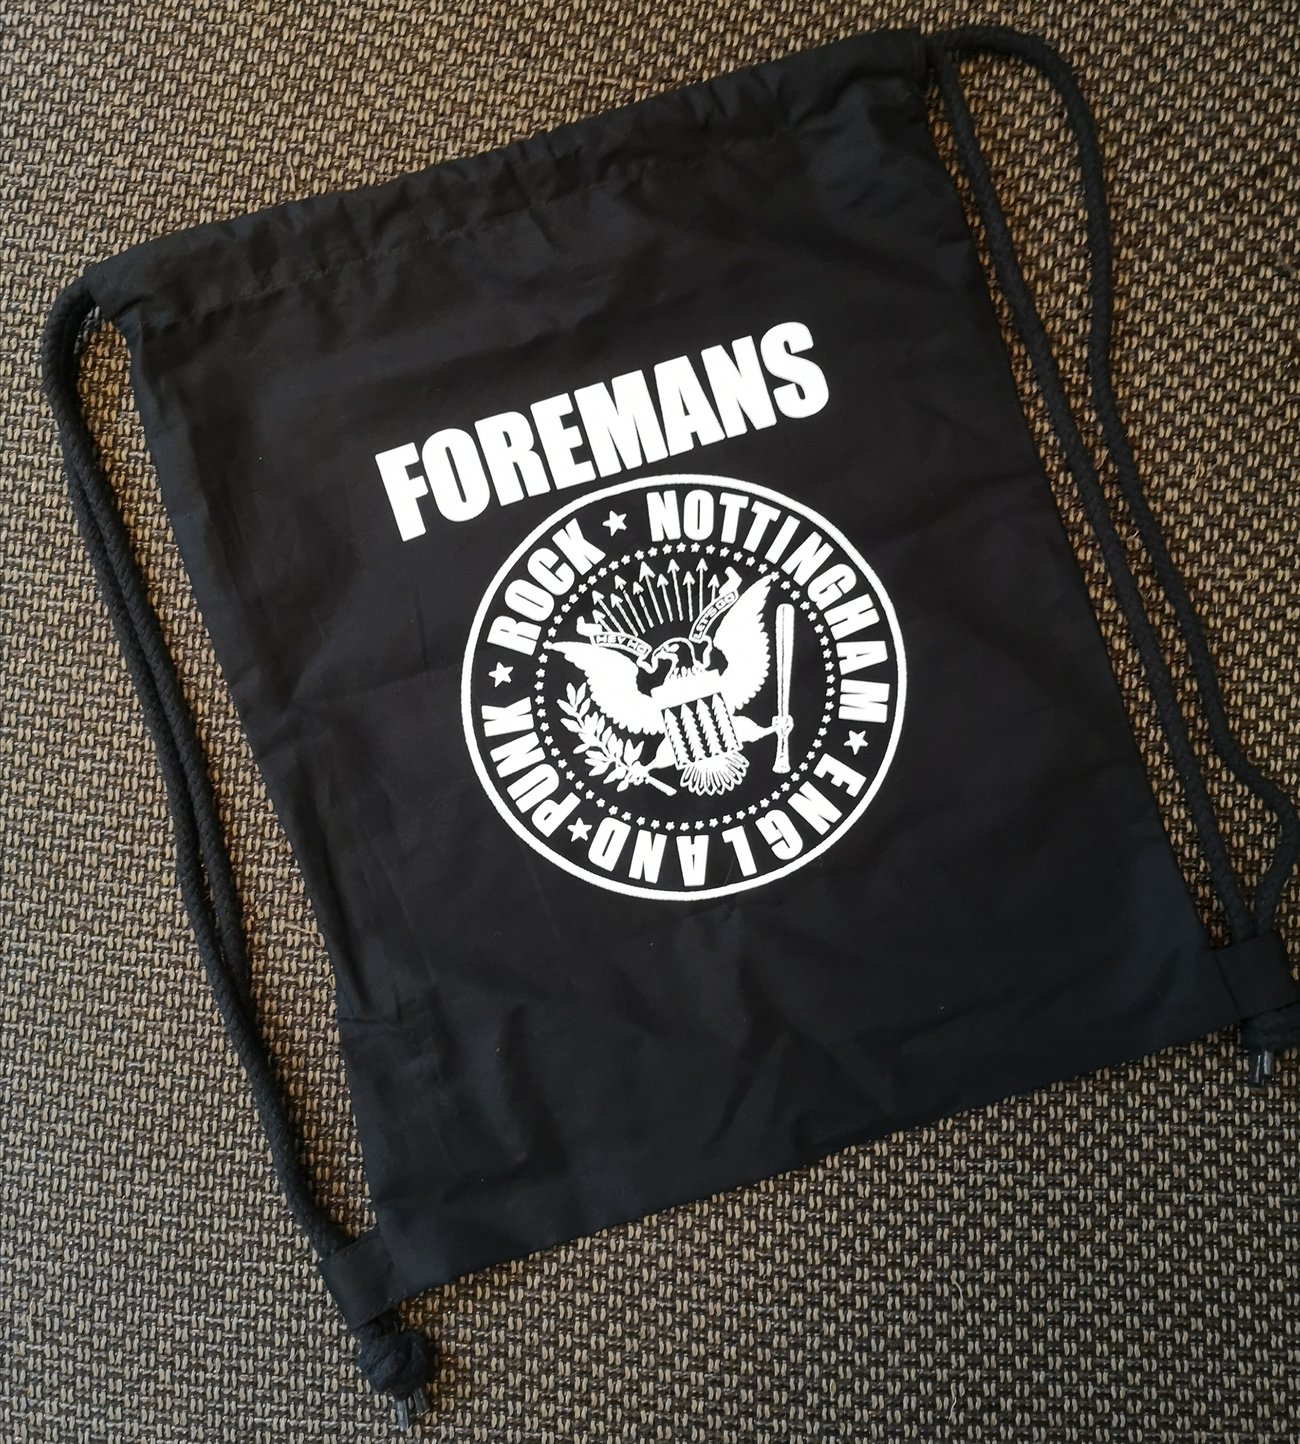 Products | Foremans